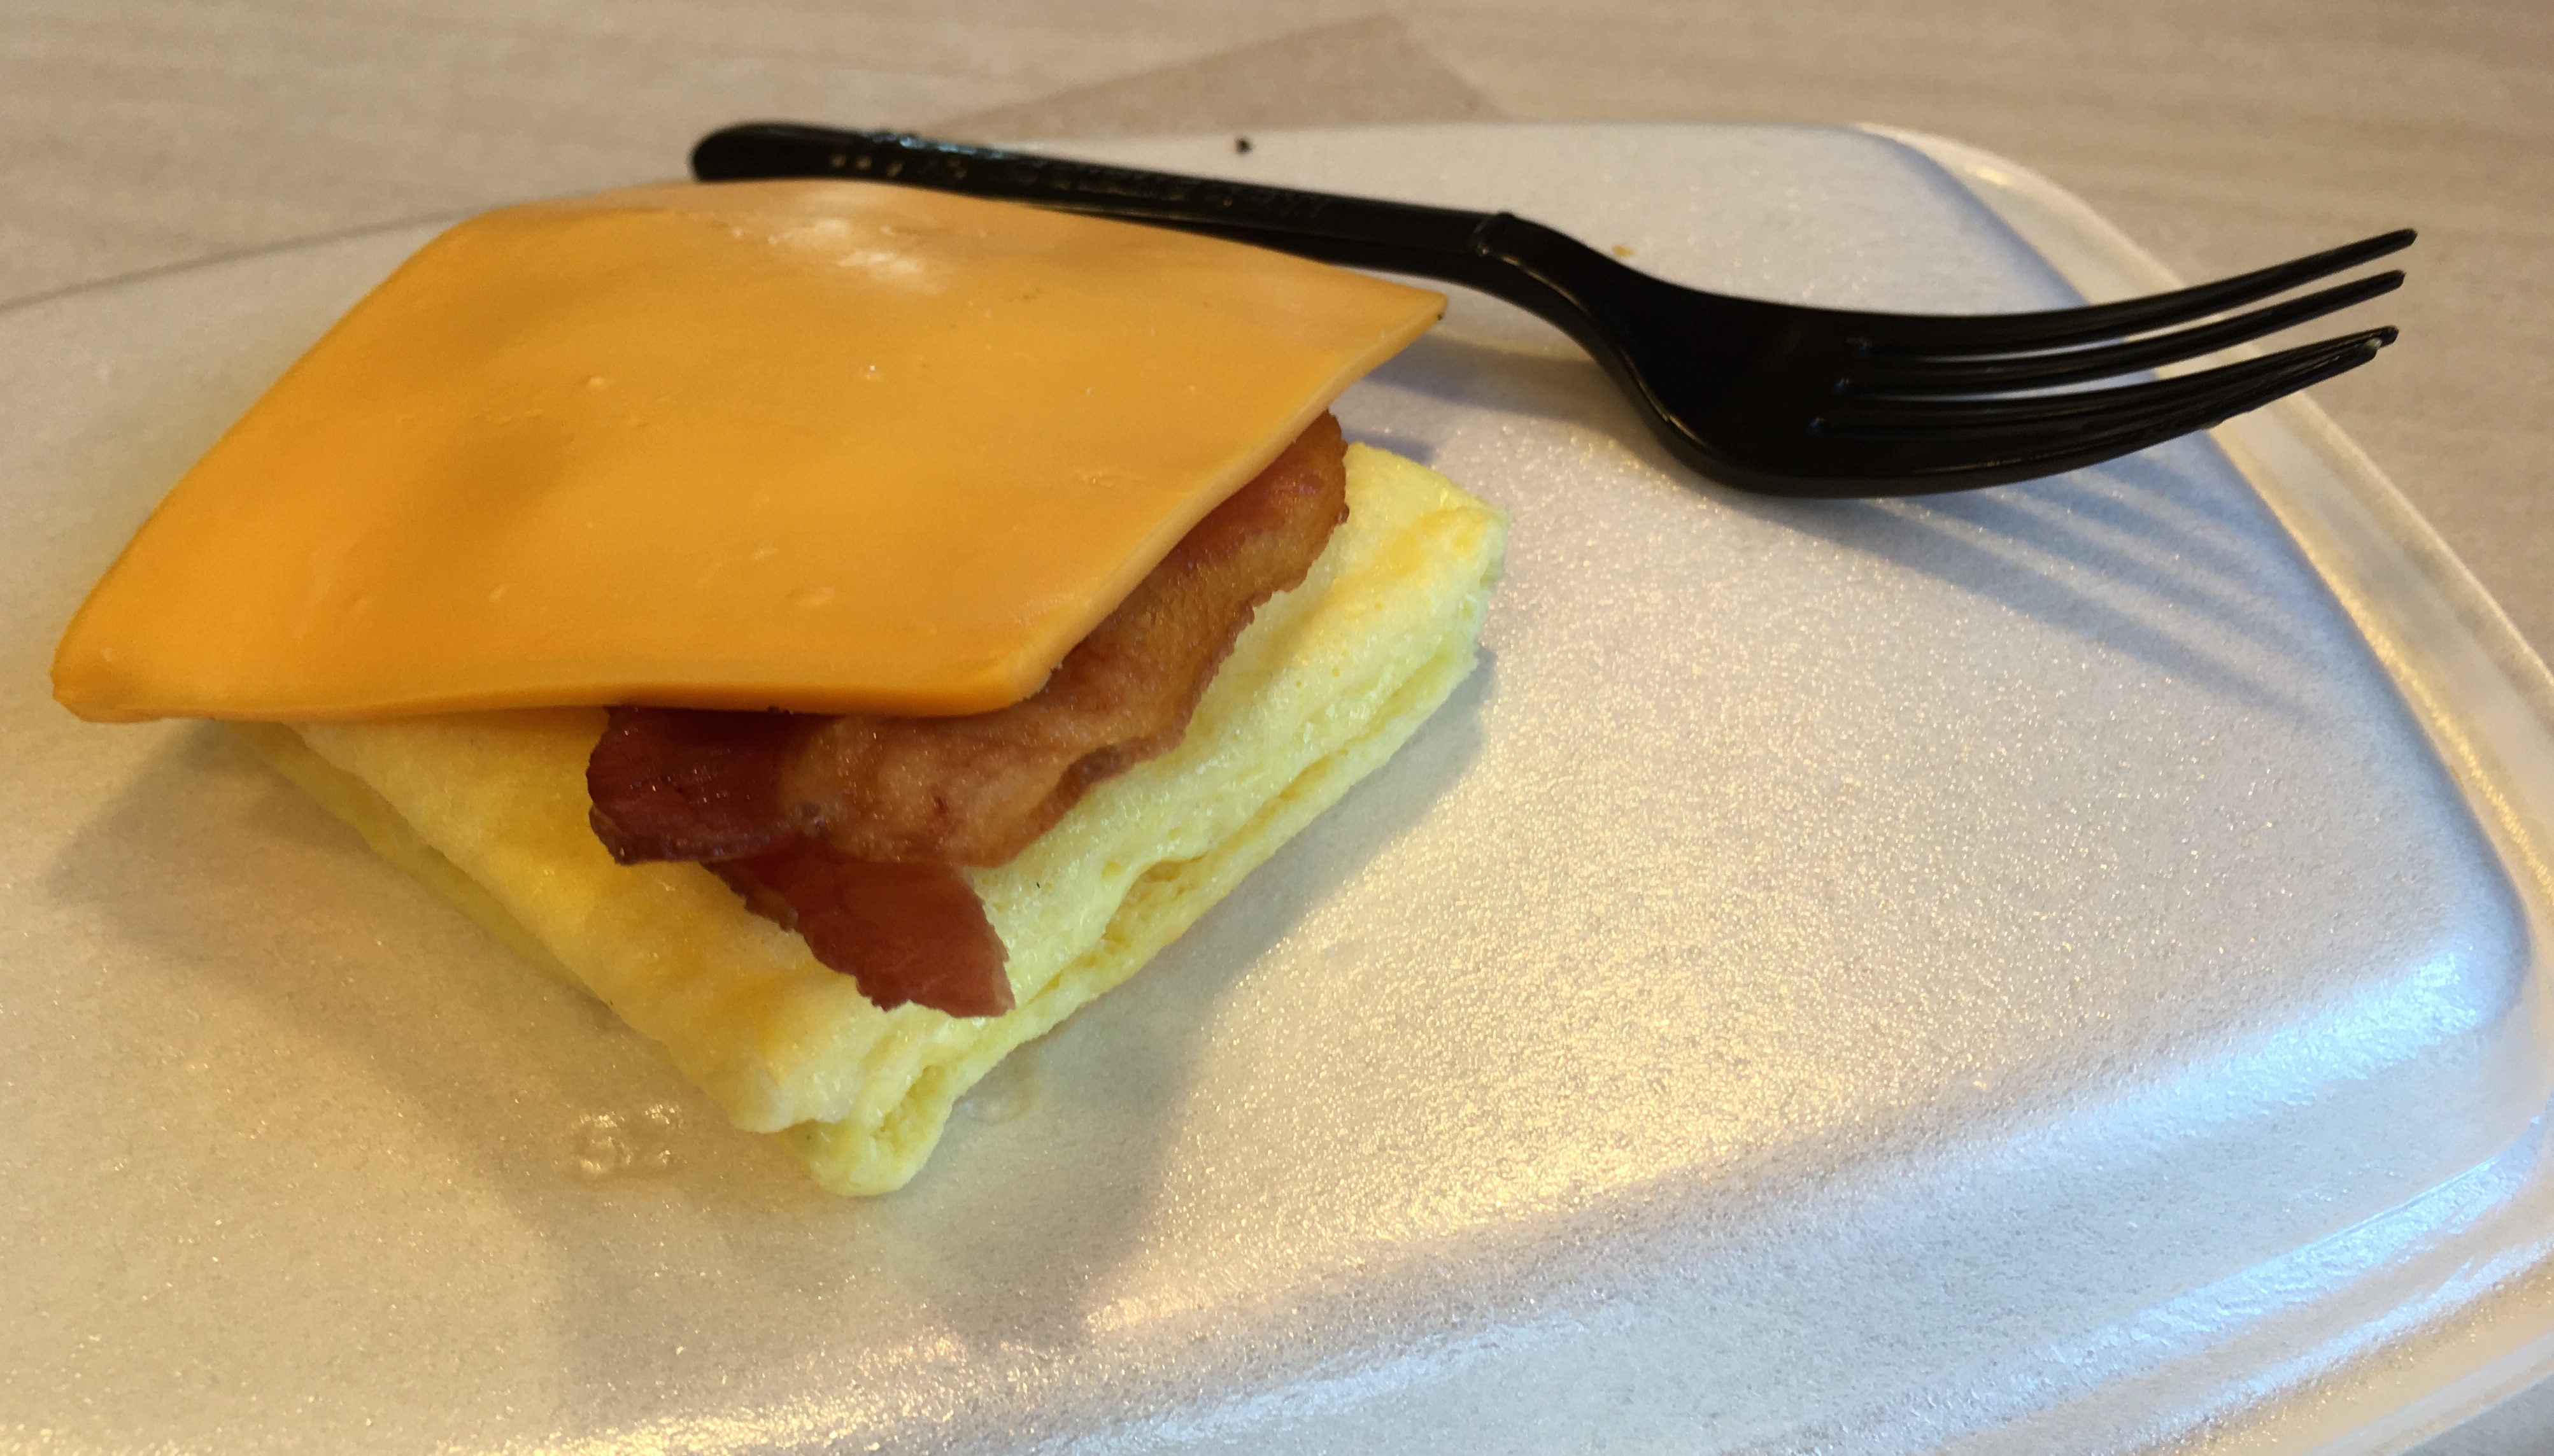 Low Carb McDonalds Bacon Egg and Cheese Biscuit